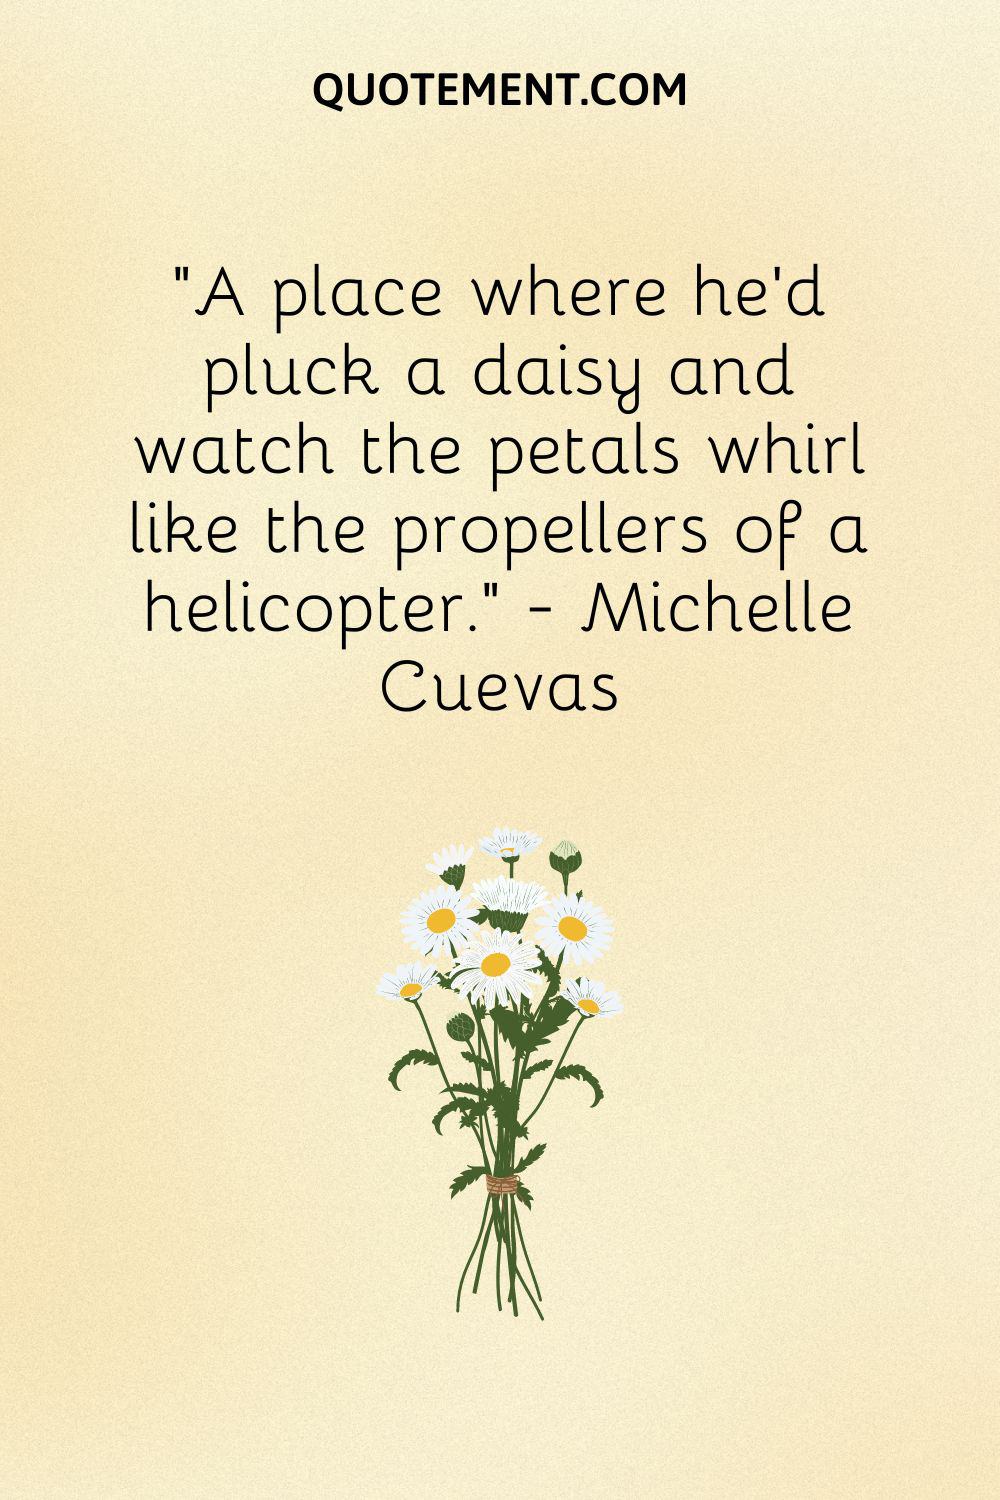 A place where he’d pluck a daisy and watch the petals whirl like the propellers of a helicopter.